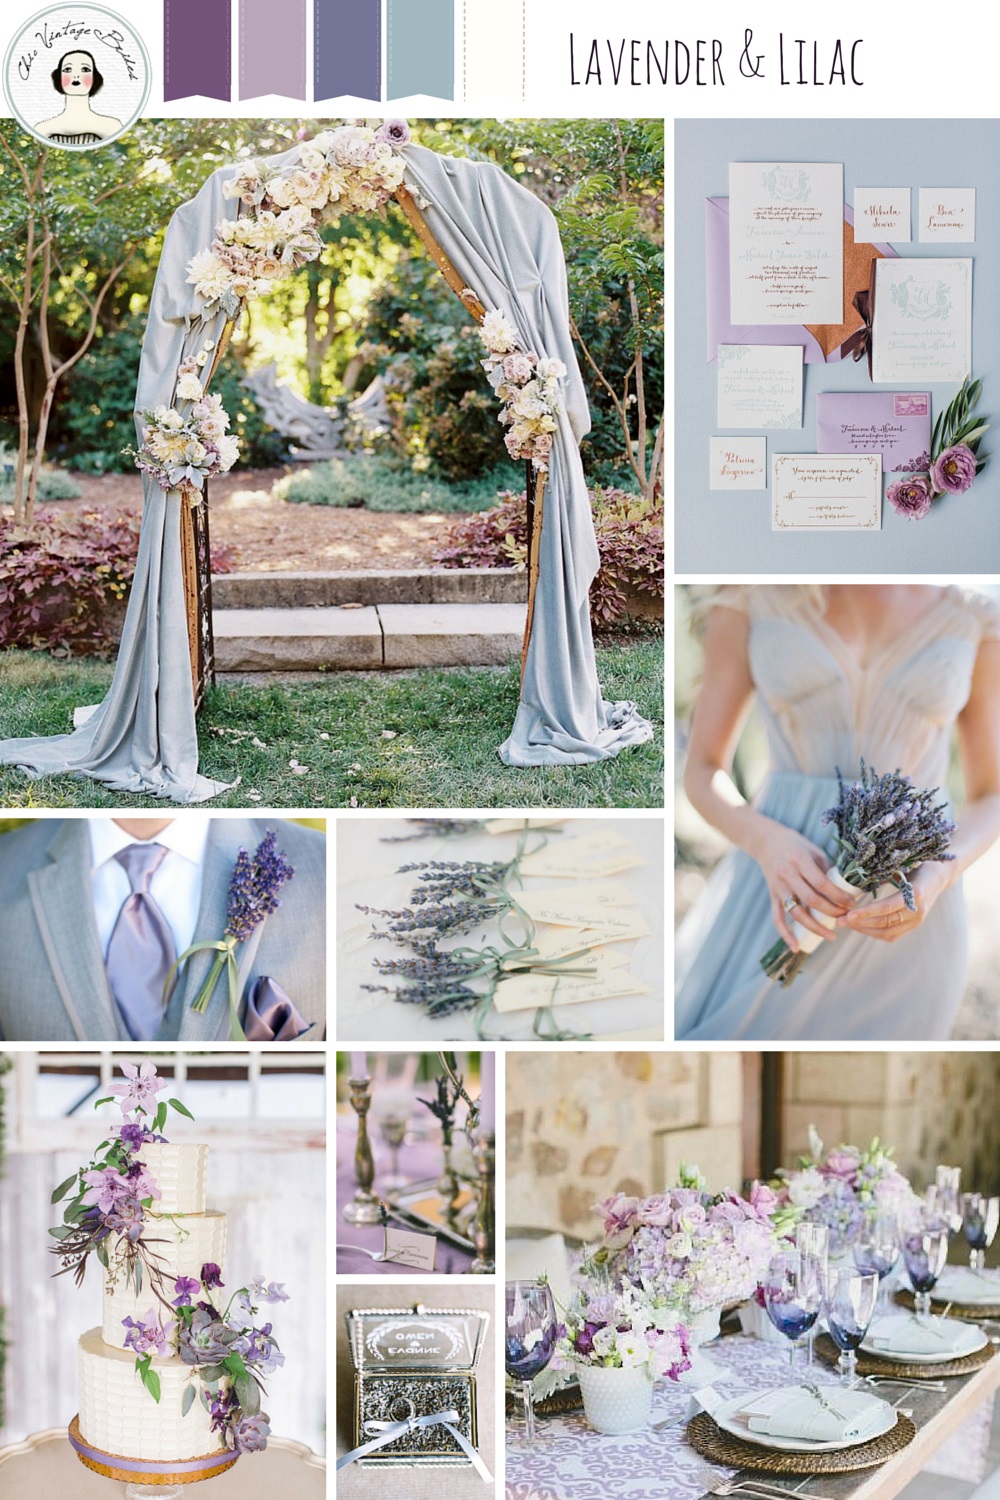 Lavender & Lilac – Spring Wedding Inspiration In Romantic Shades of Purple